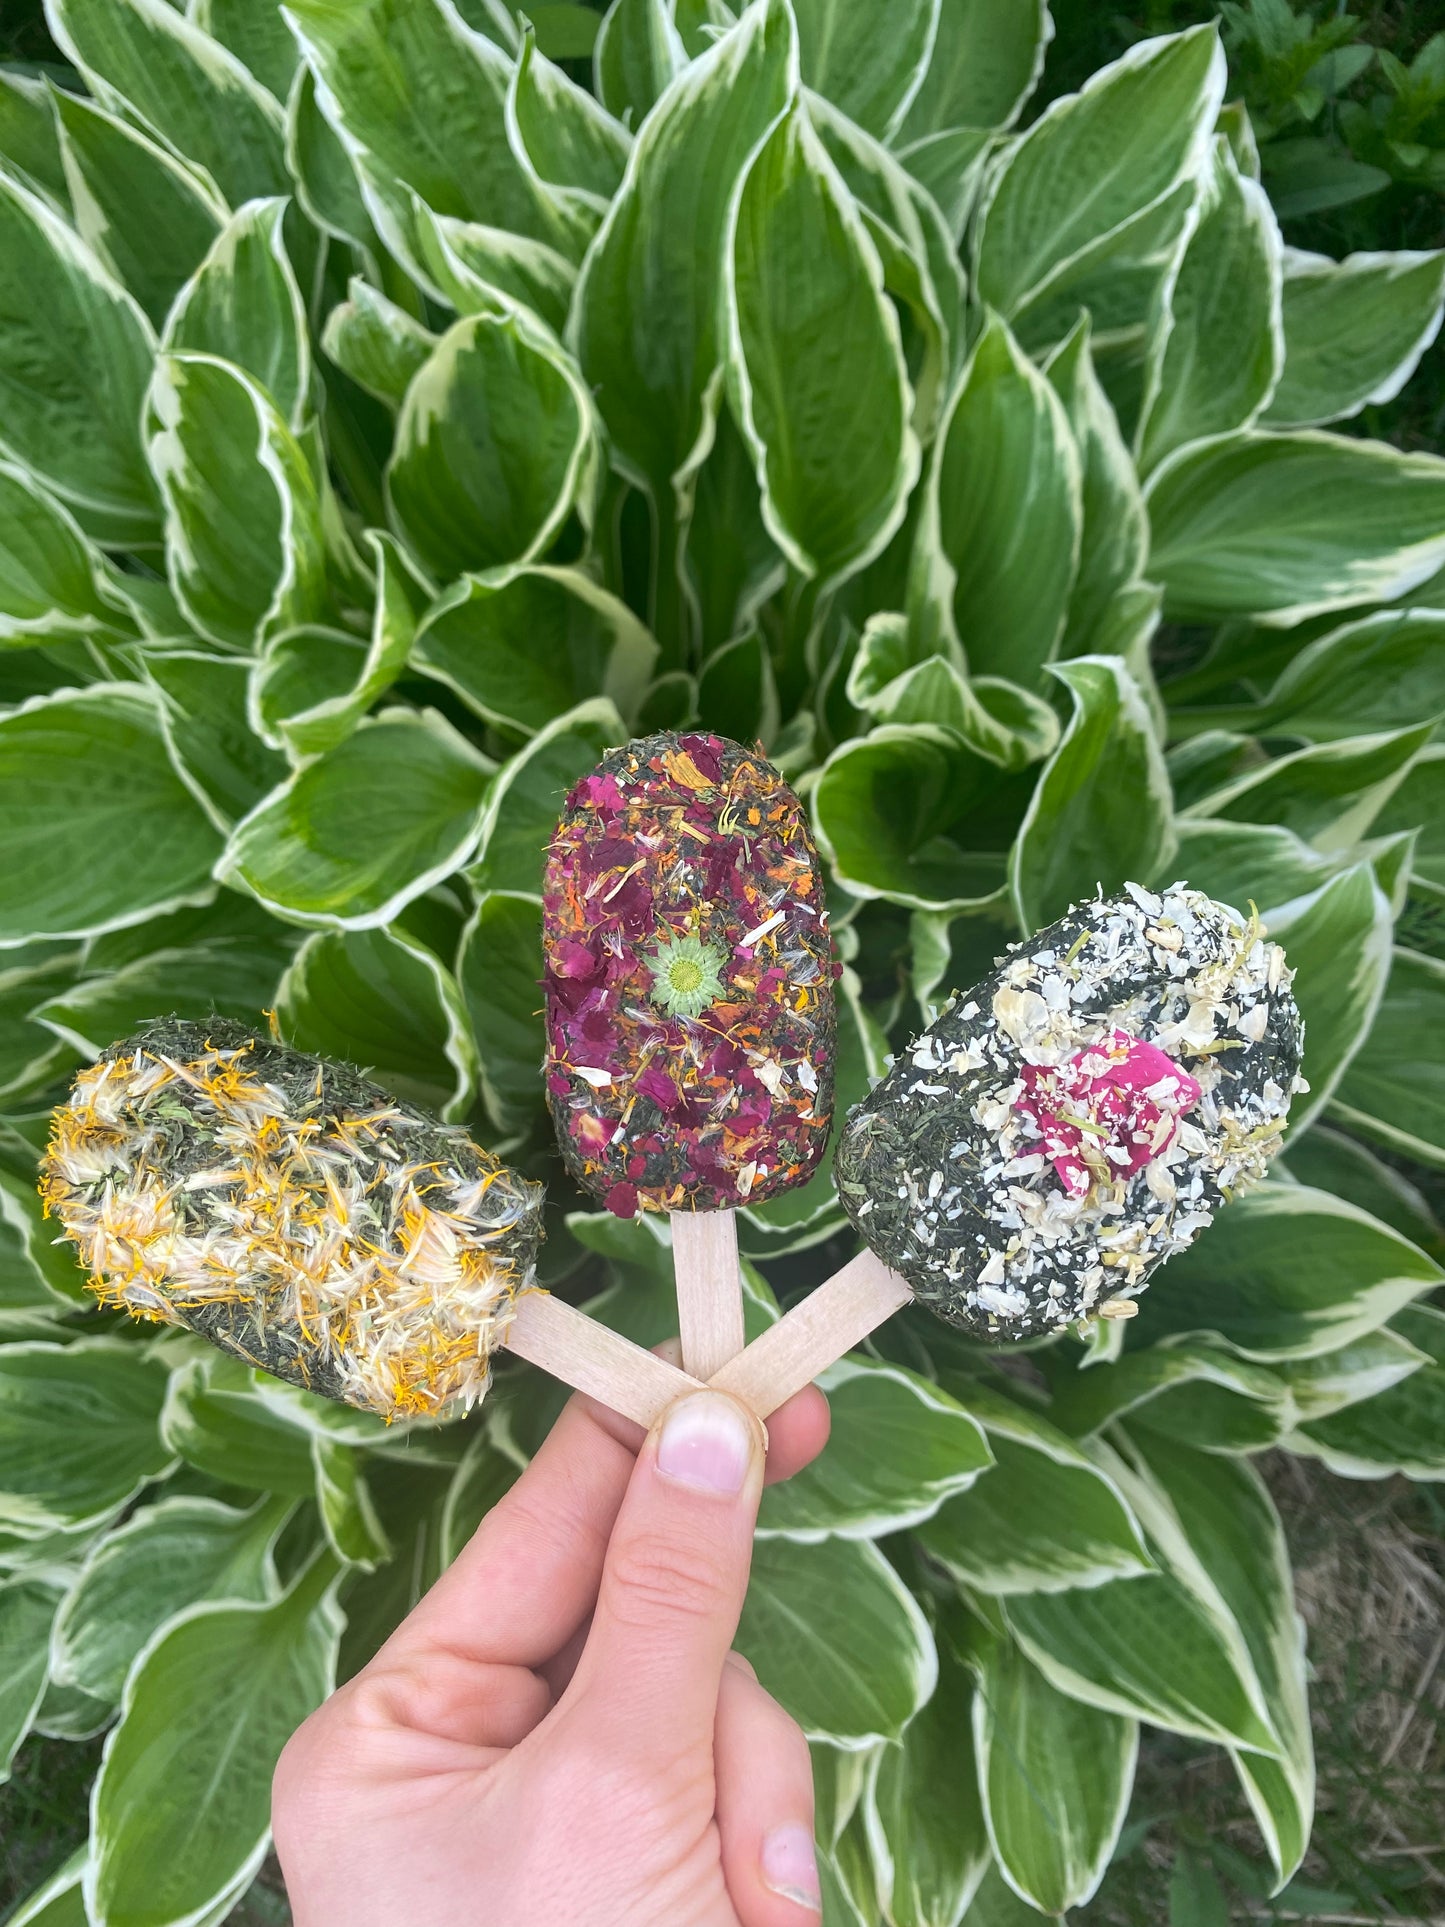 Popsicle treats, fresh grass - Product of Quebec